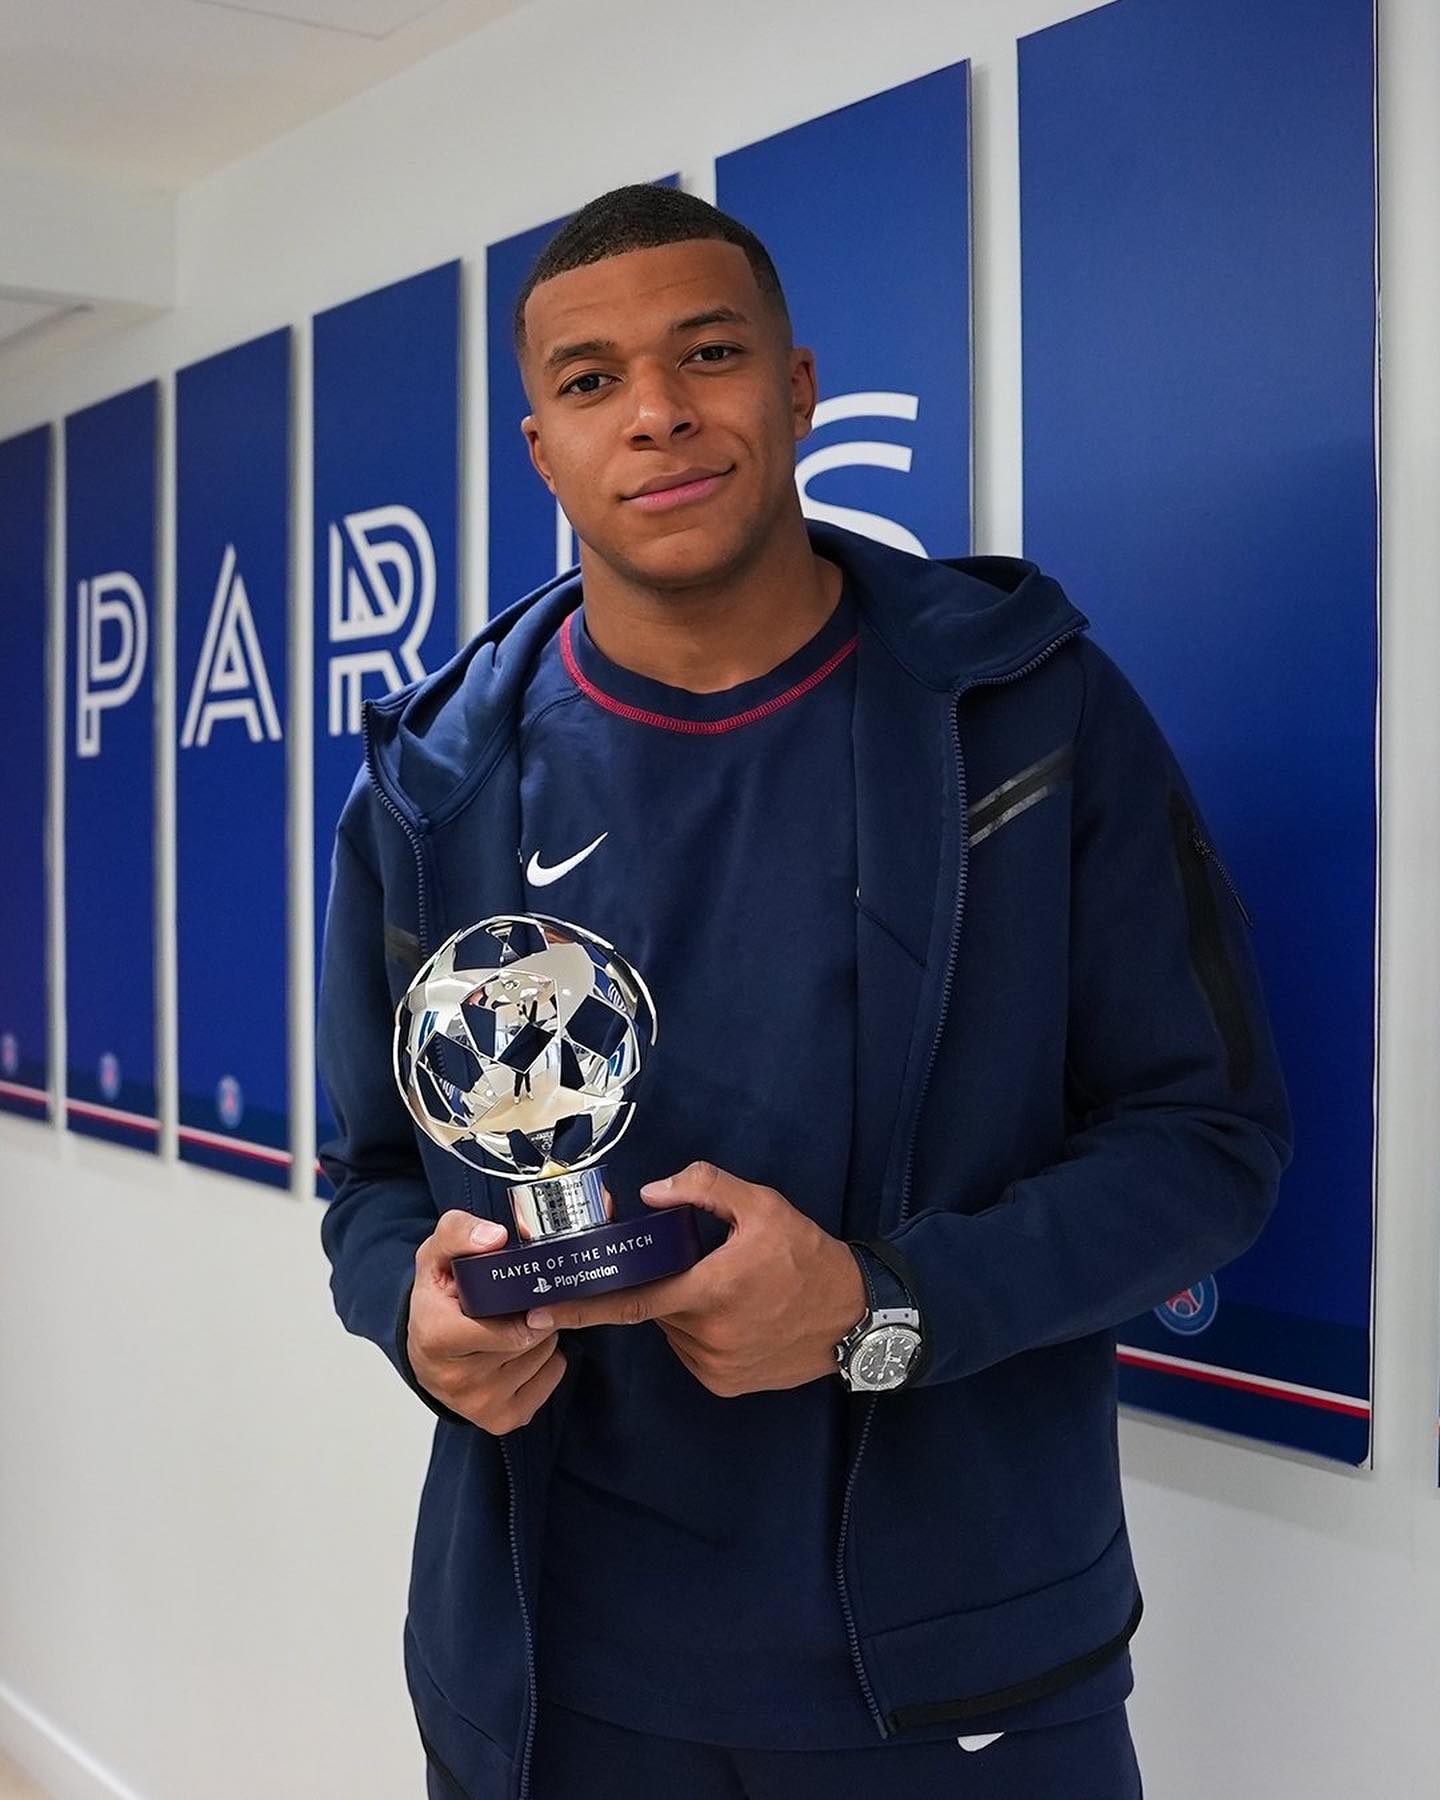 Kylian Mbappe Age, Height, Weight, Net Worth